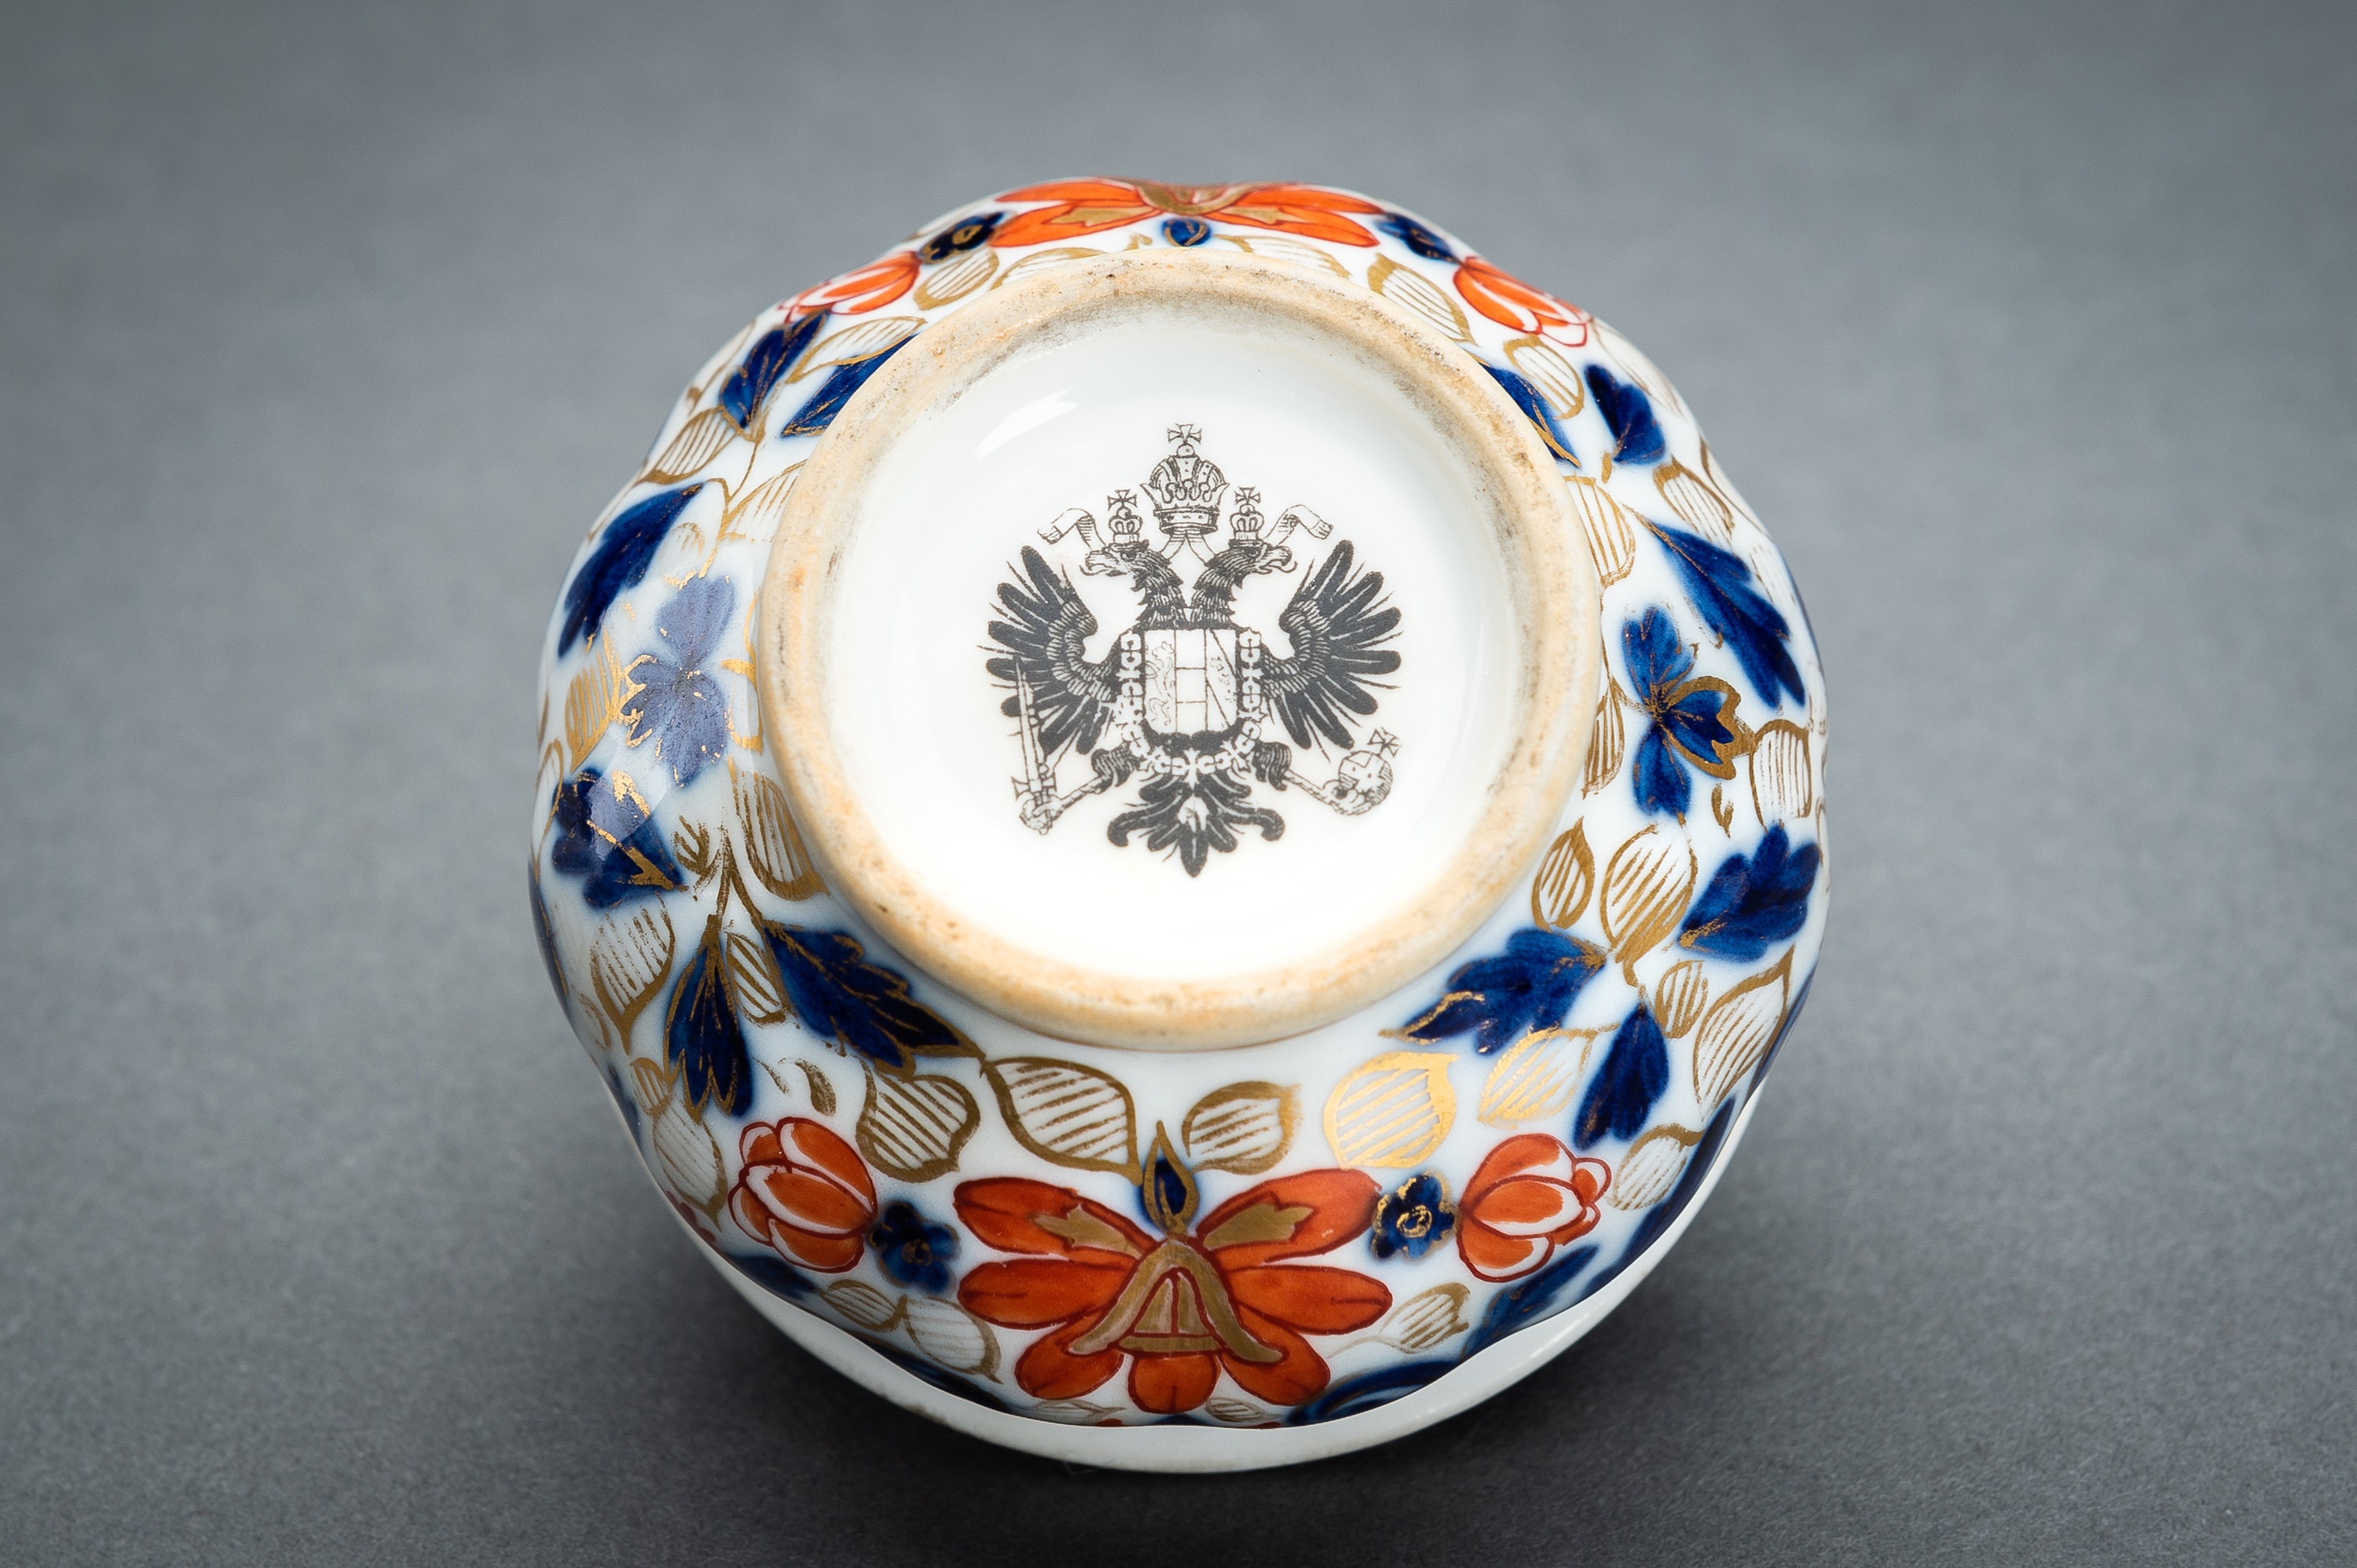 A GROUP OF FOUR MINIATURE PORCELAIN ITEMS - Image 16 of 16